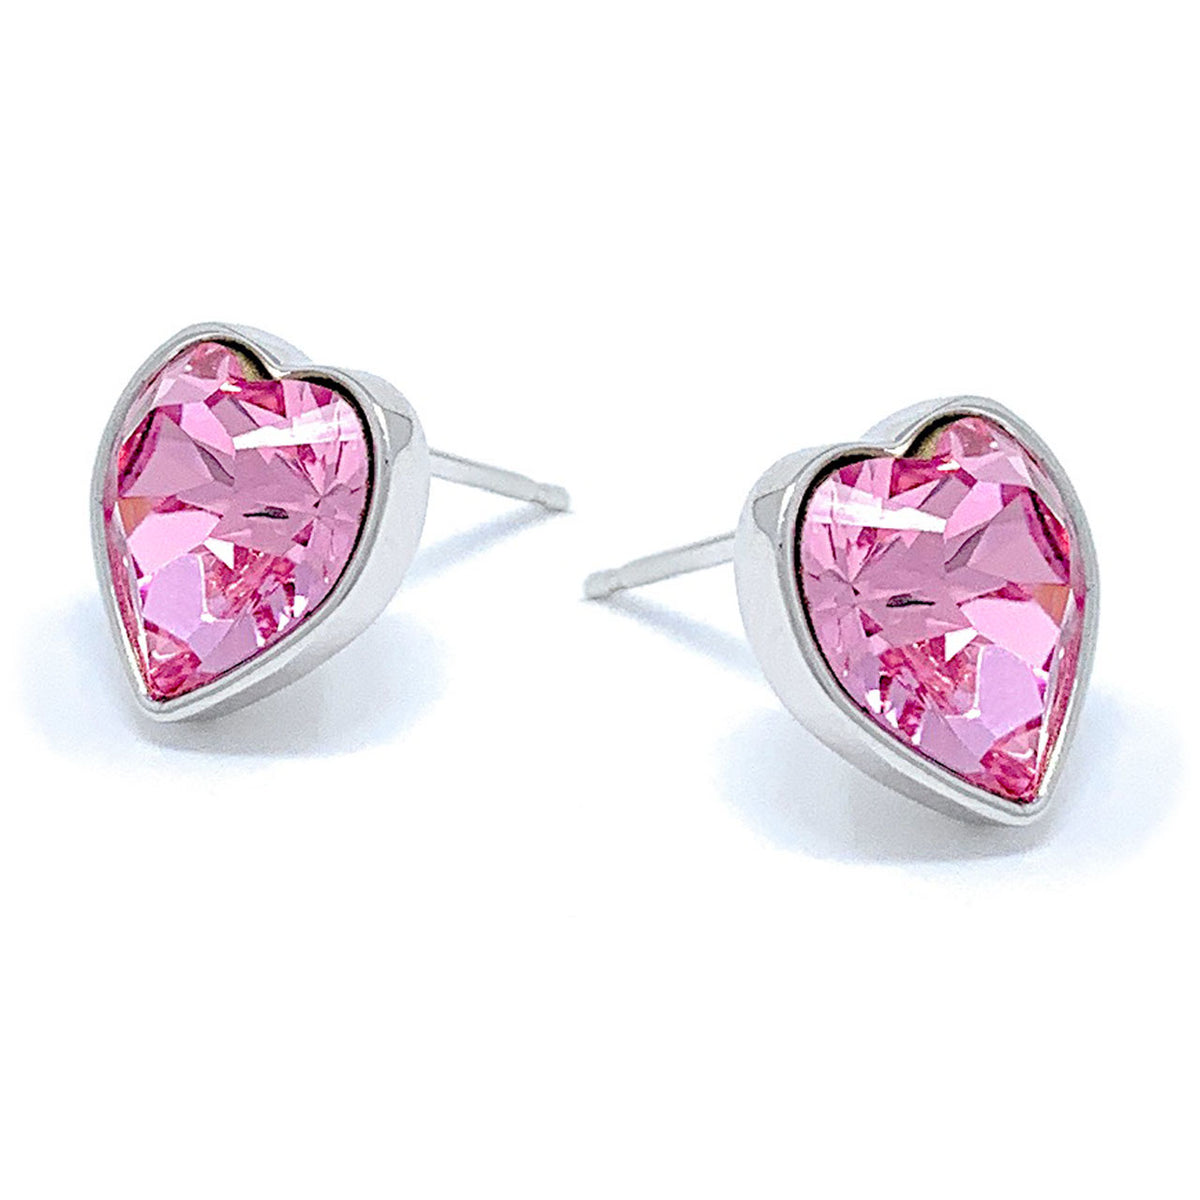 Lucia Stud Earrings with Pink Light Rose Heart Crystals from Swarovski Silver Toned Rhodium Plated - Ed Heart